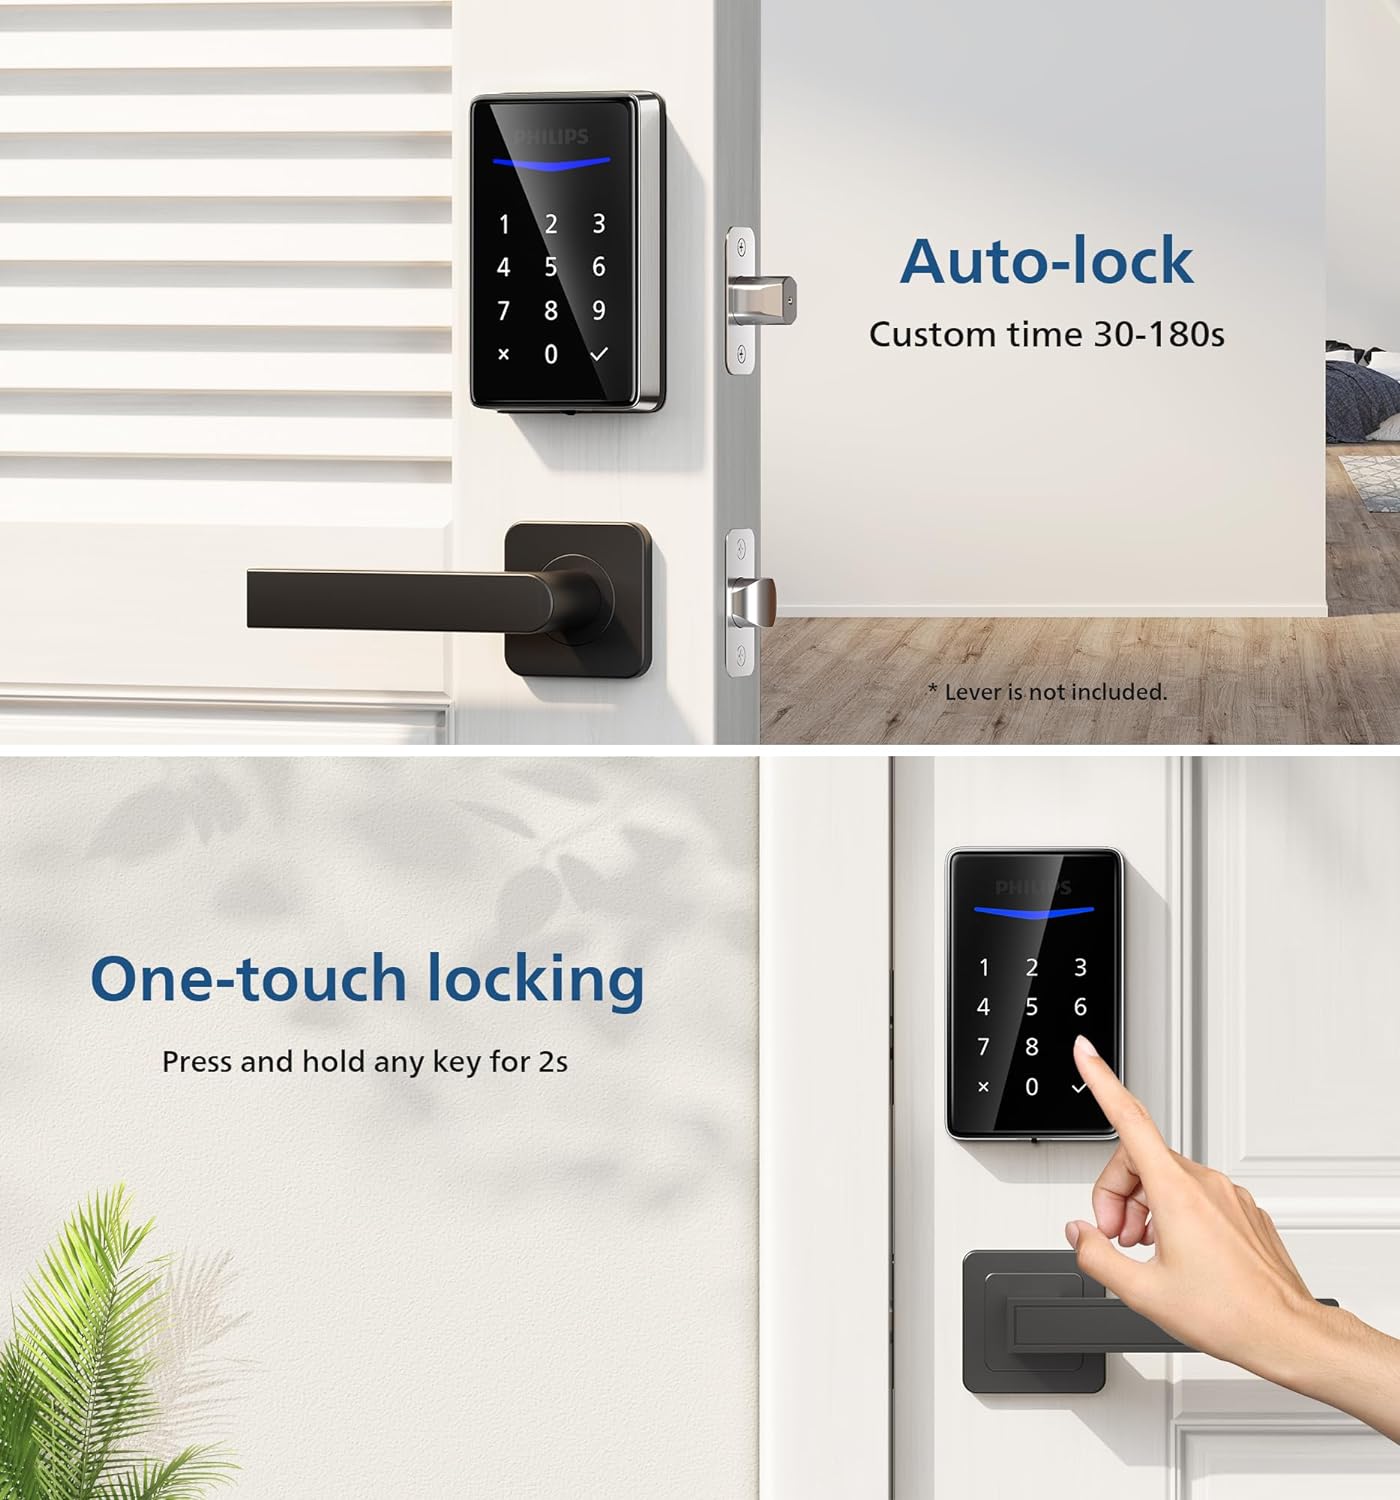 Philips Keyless Entry Door Lock - Generate One-time Code Remotely Nonconnected- Touchscreen Keypad Standalone Deadbolt Lock